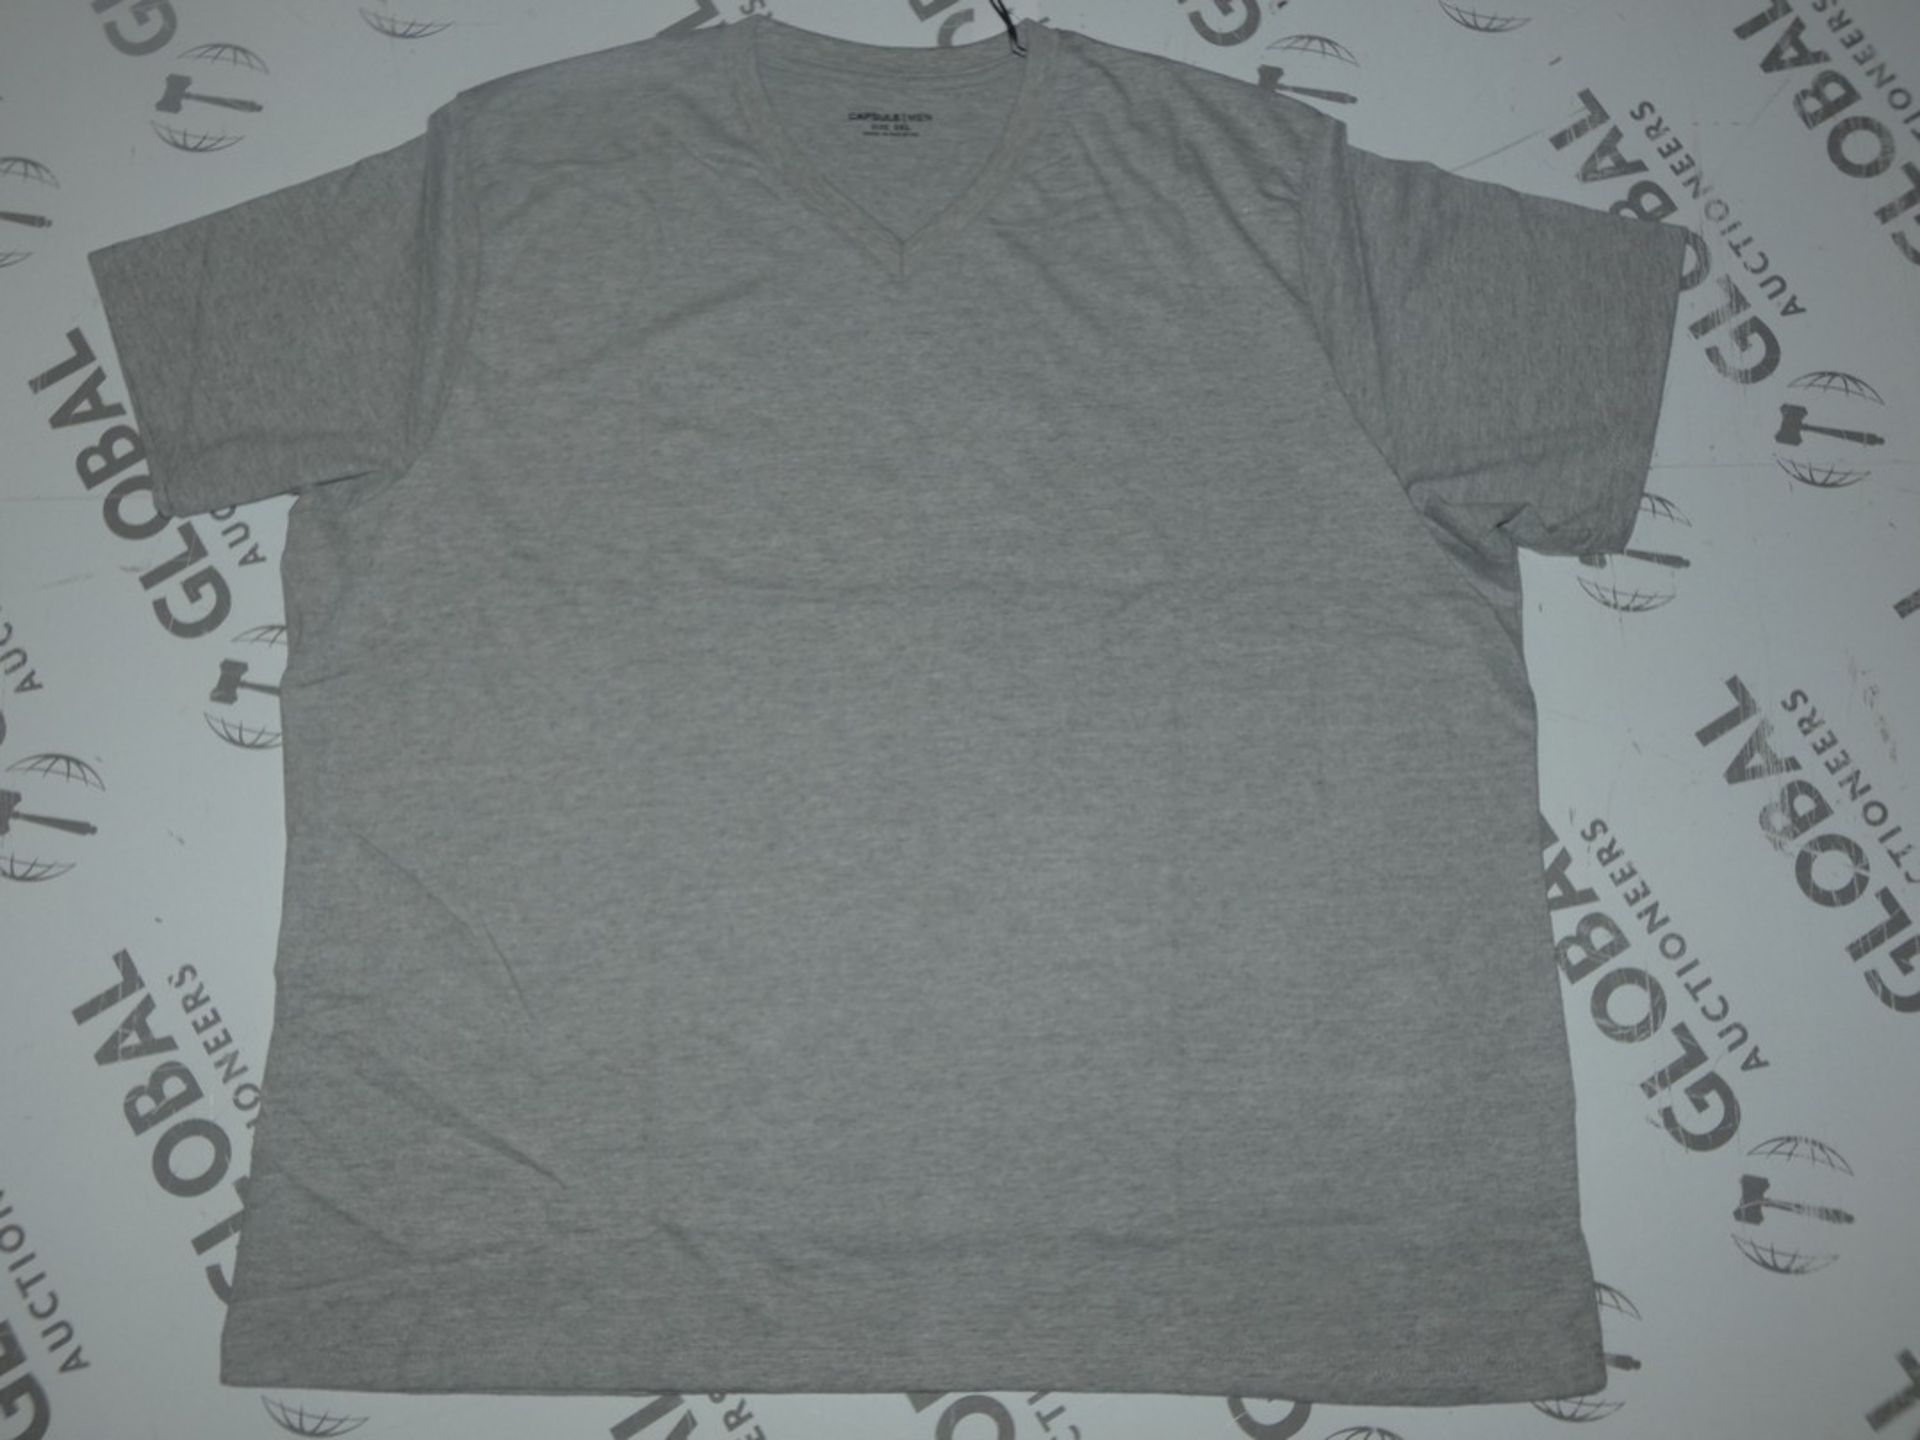 Lot to Contain 10 Brand New Capsule Men Grey V Neck T-Shirts Combined RRP £250 (£25 Each)